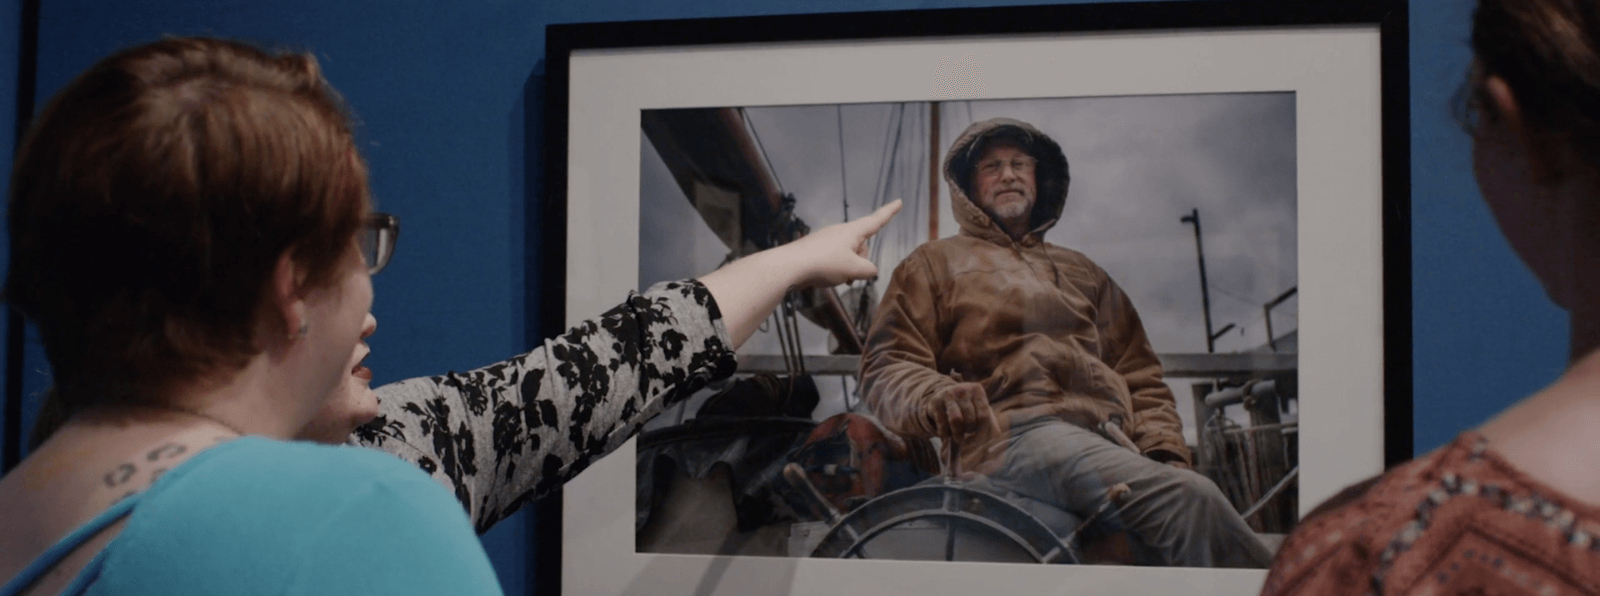 A person in a gallery points to a painting of a person on a boat